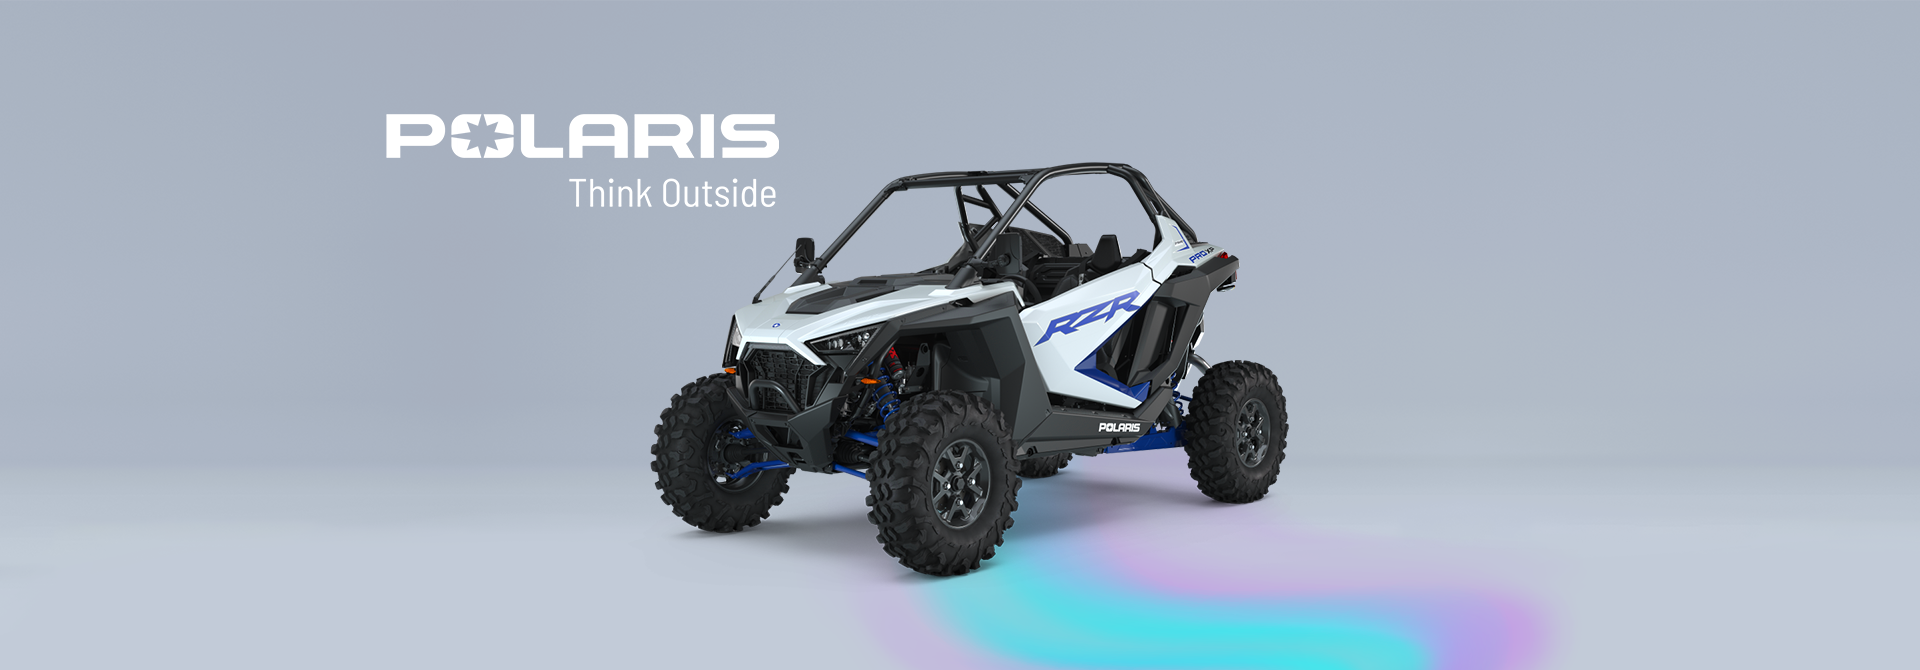 Tegeta Off Road Vehicles is the official importer of Polaris in Georgia